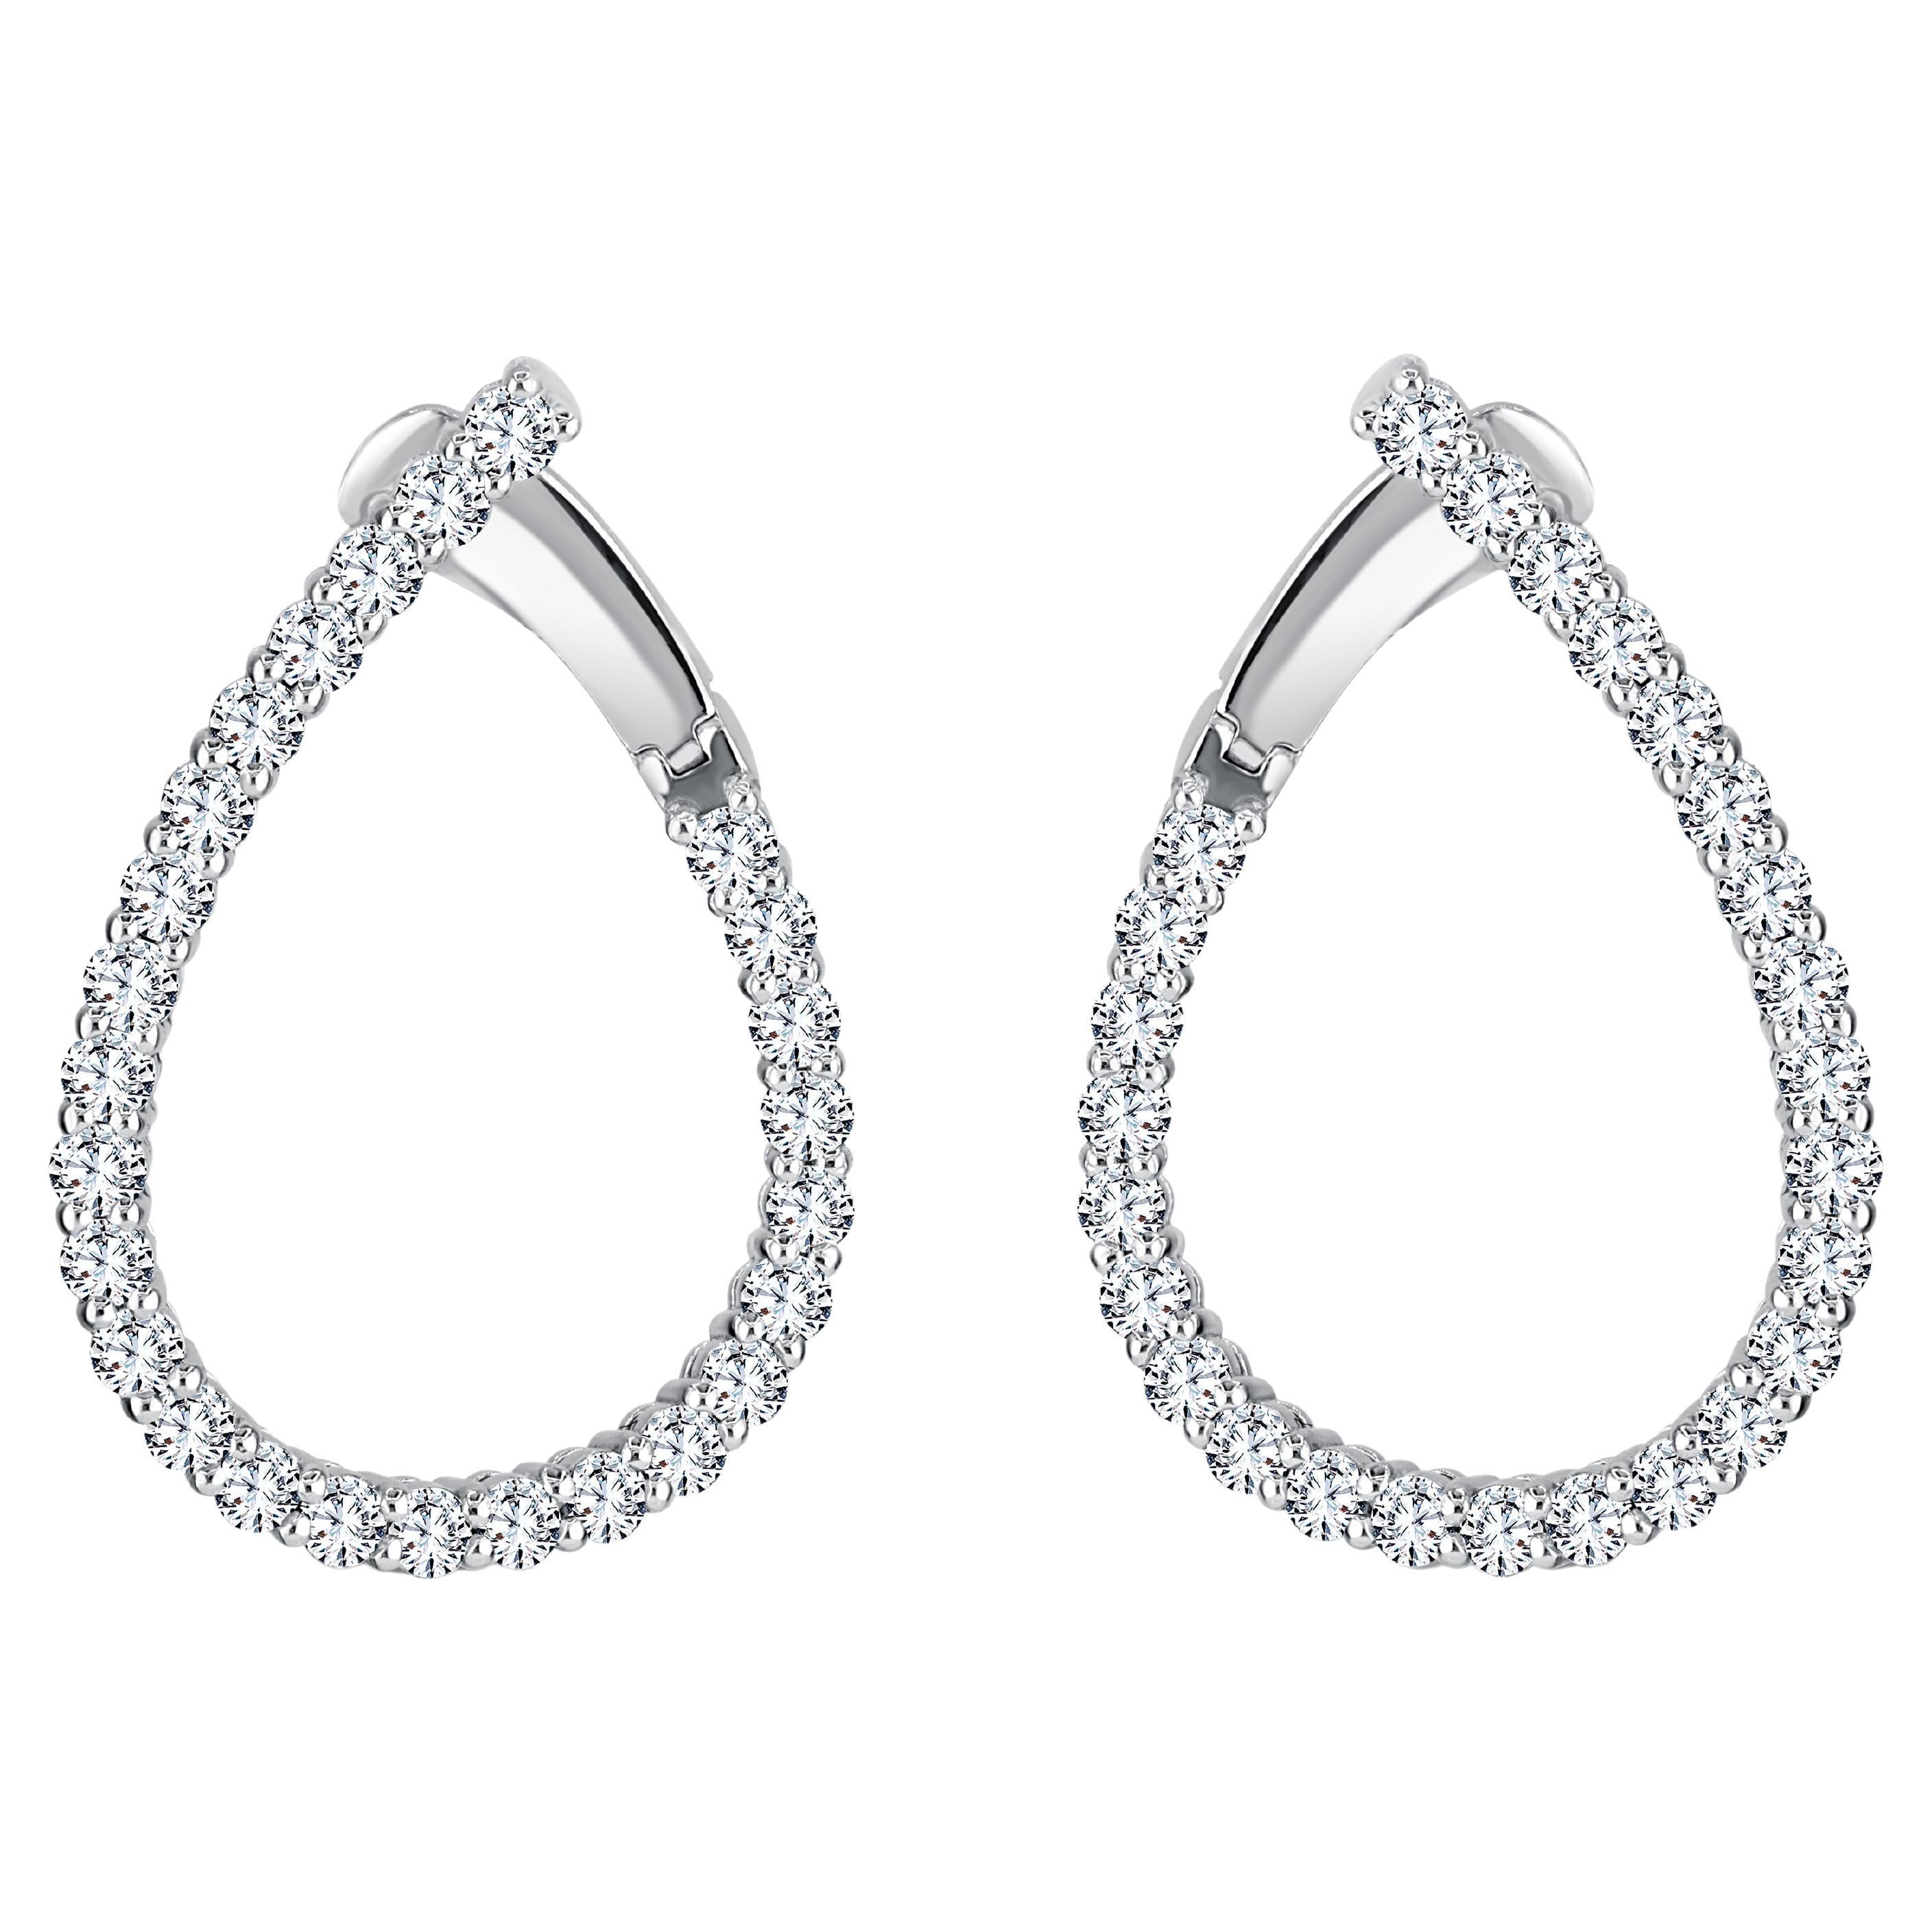 This pair of earrings showcases an exquisite arrangement of 2.19 carats of round white diamonds, elegantly placed along the gracefully twisting teardrop-shaped hoops. To ensure a secure and comfortable fit, a small lever serves as the closure behind